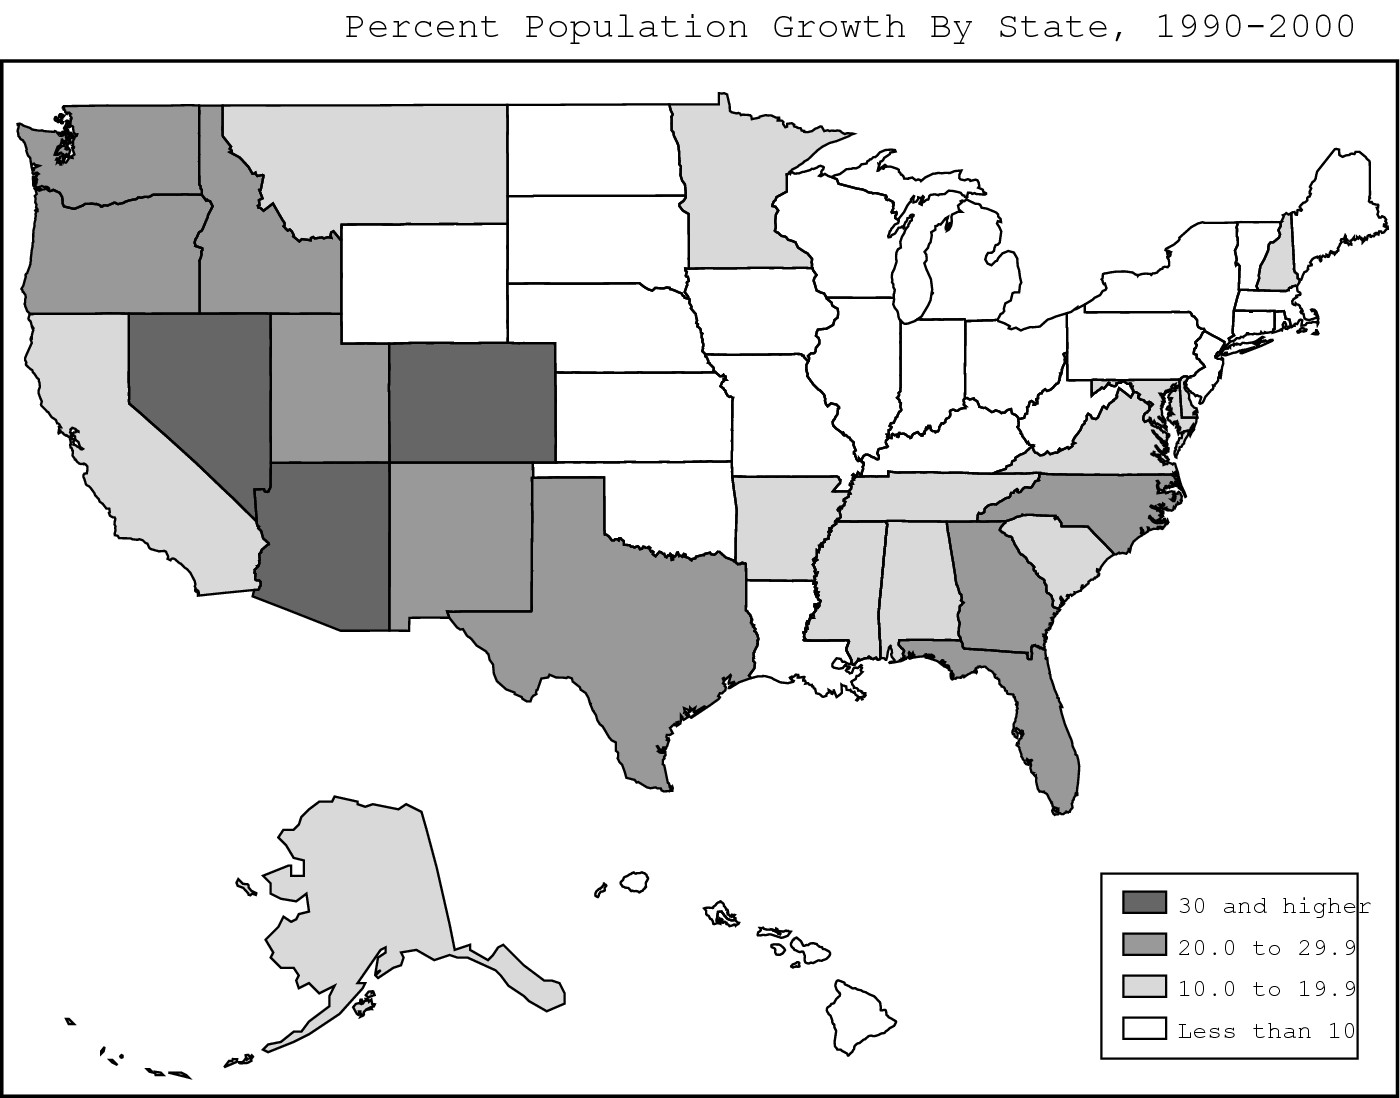 Figure 12-2: U.S. population growth by state, 1990–2000.